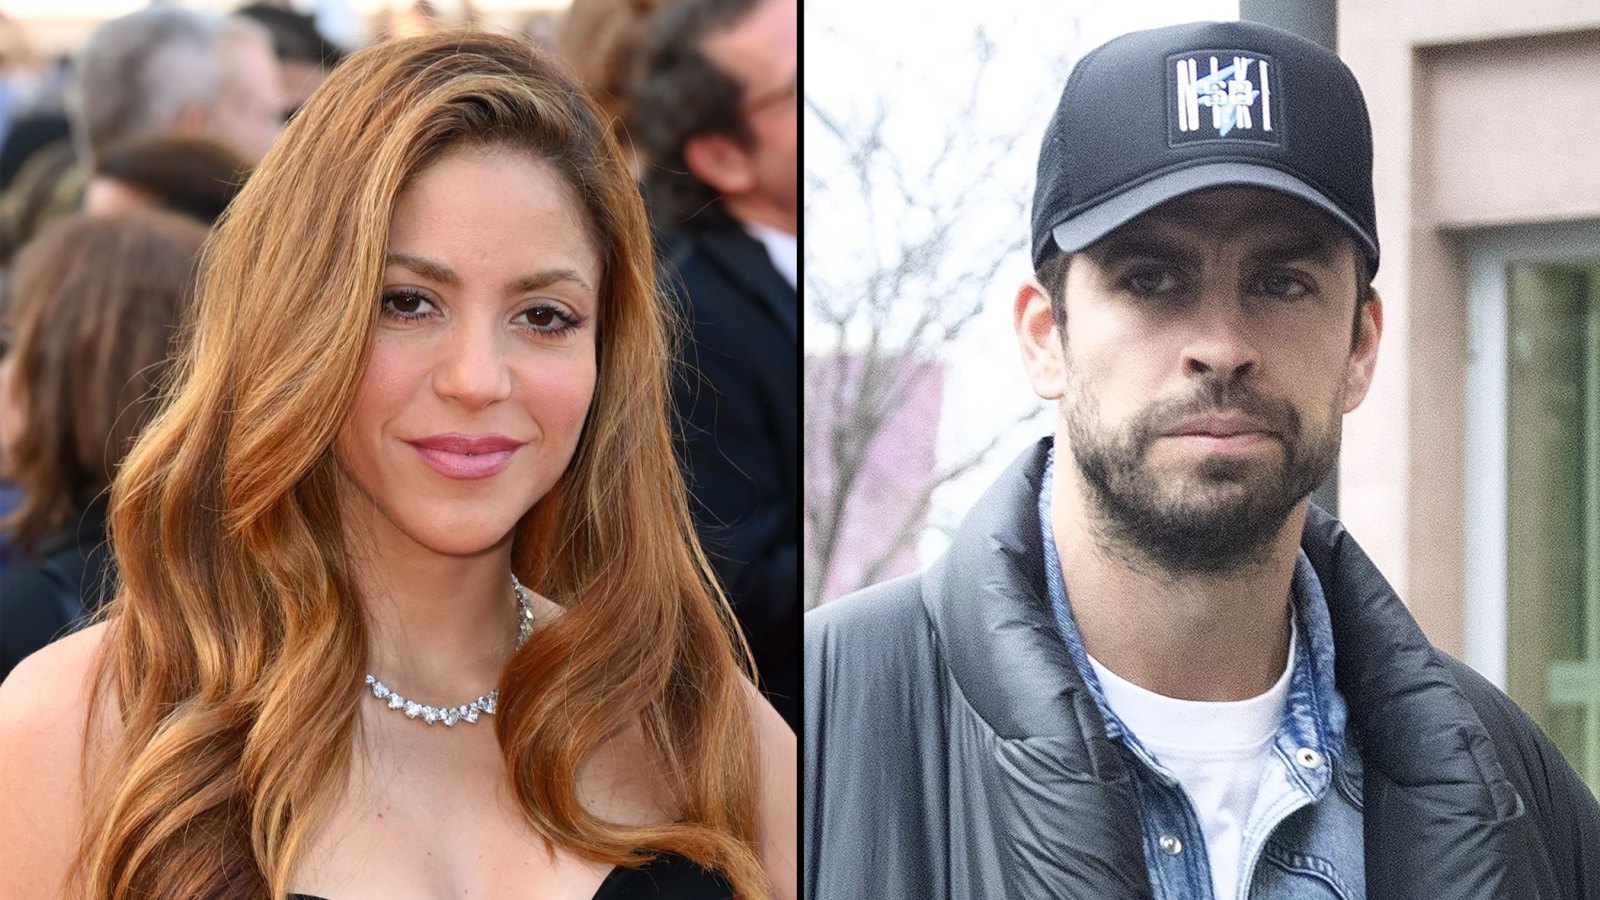 Shakira Seemingly Slams Ex Gerard Pique and His Girlfriend Clara Chia Marti in New Song: 'You Gave Your Worst Version'